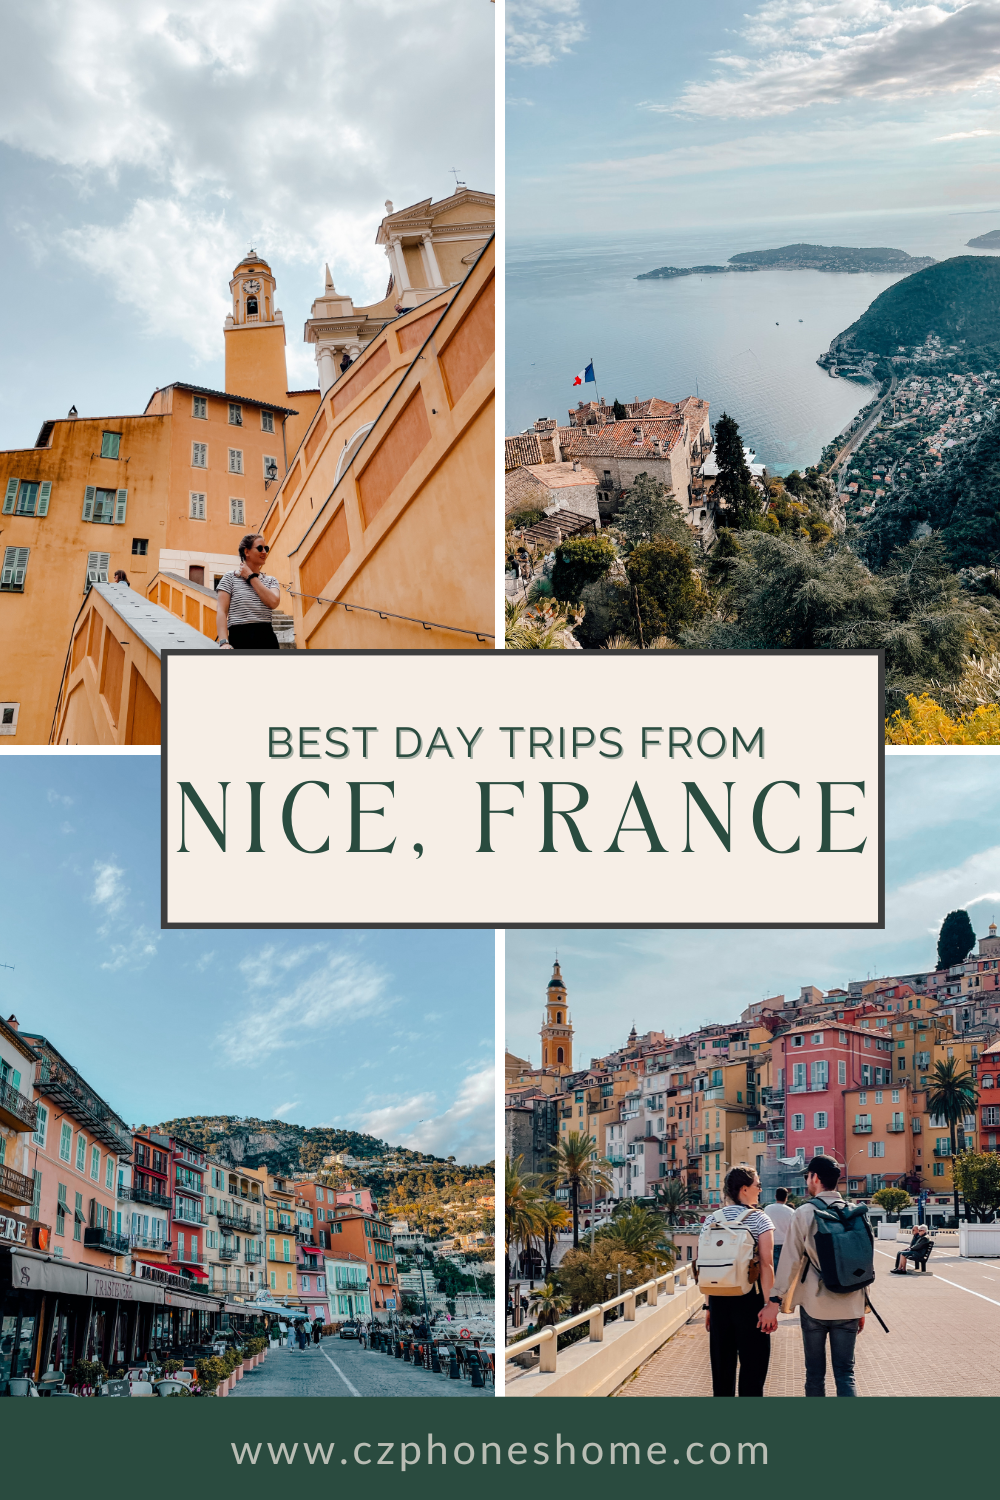 Best day trips from Nice